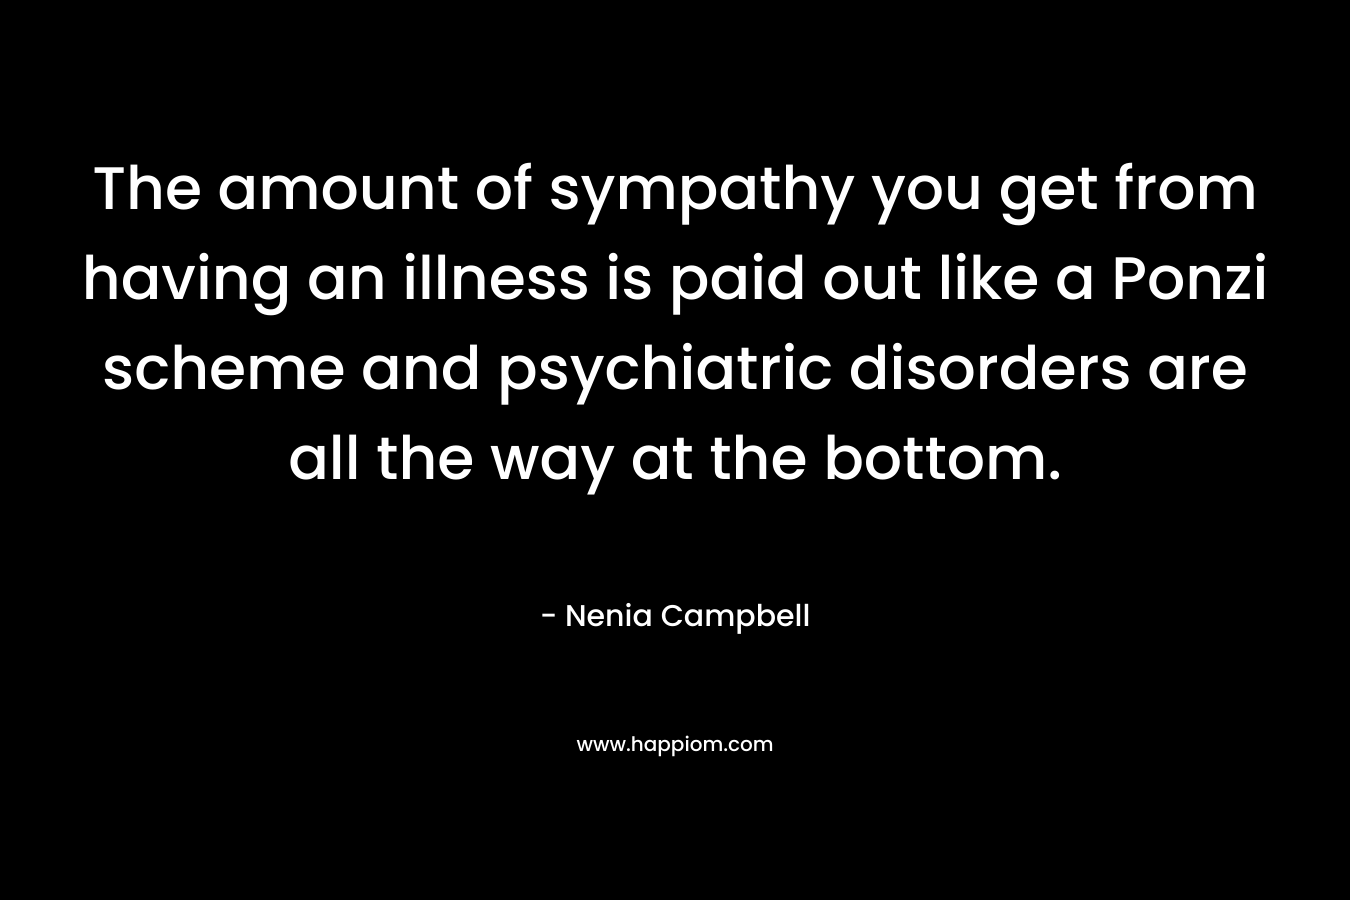 The amount of sympathy you get from having an illness is paid out like a Ponzi scheme and psychiatric disorders are all the way at the bottom.